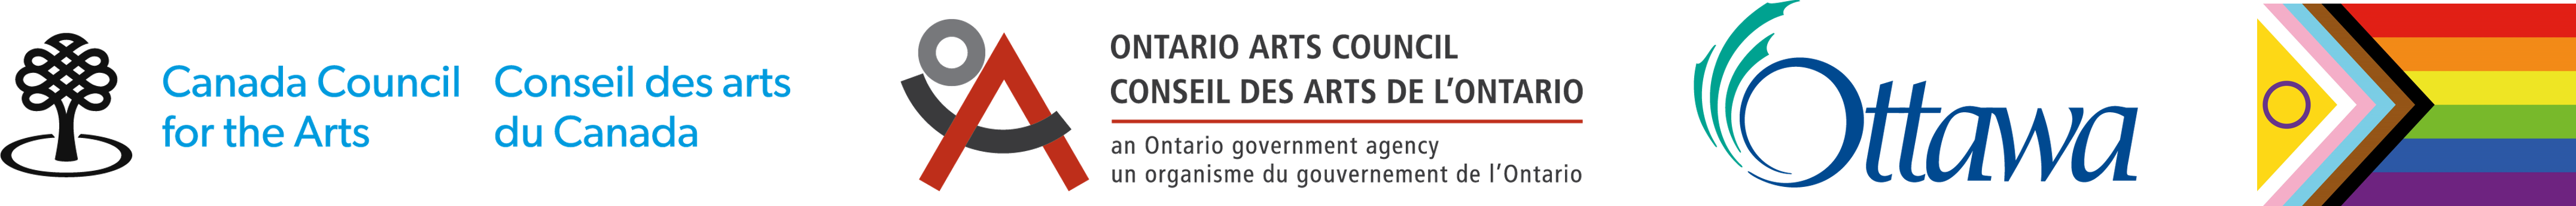 Christos Pantieras acknowledges the support of the Canada Council for the Arts. Christos Pantieras acknowledges the funding support from the Ontario Arts Council, an agency of the Government of Ontario. Christos Pantieras gratefully acknowledges the financial support of the City of Ottawa.